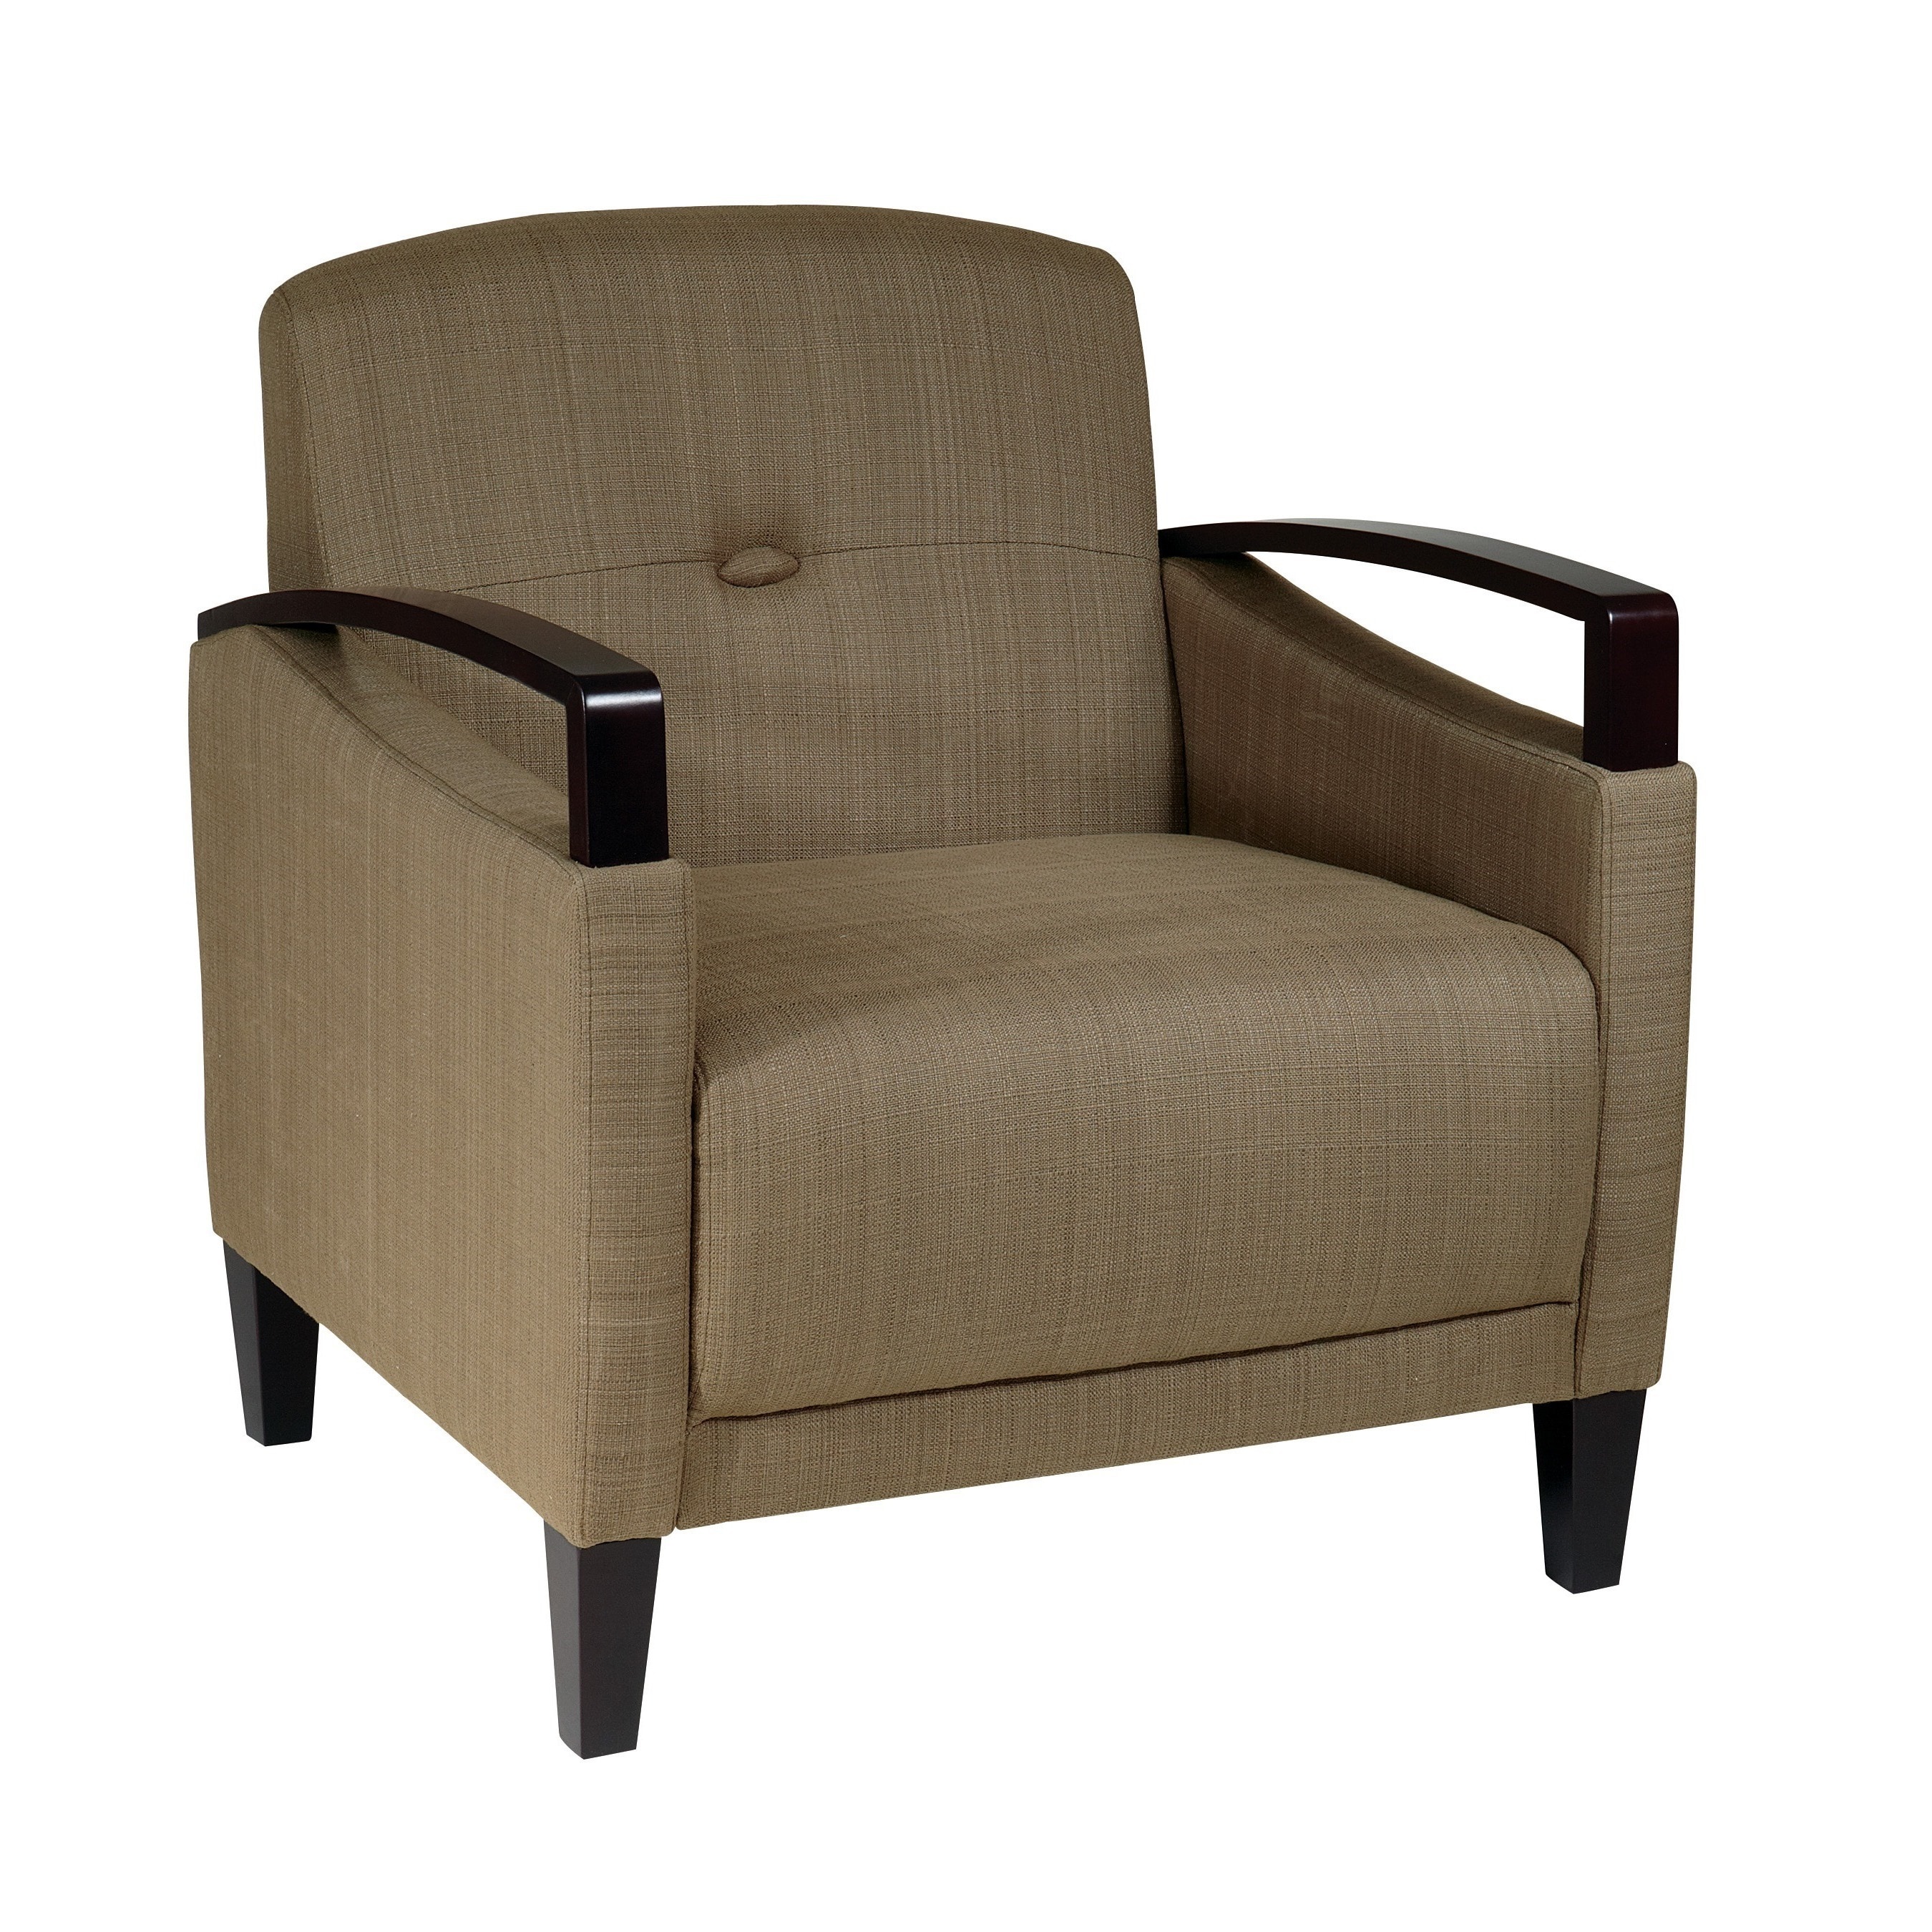 Office Star Products Main St. Woven Chair w/ Interlace Weave Fabric and Espresso Finish Wood Arms and Legs